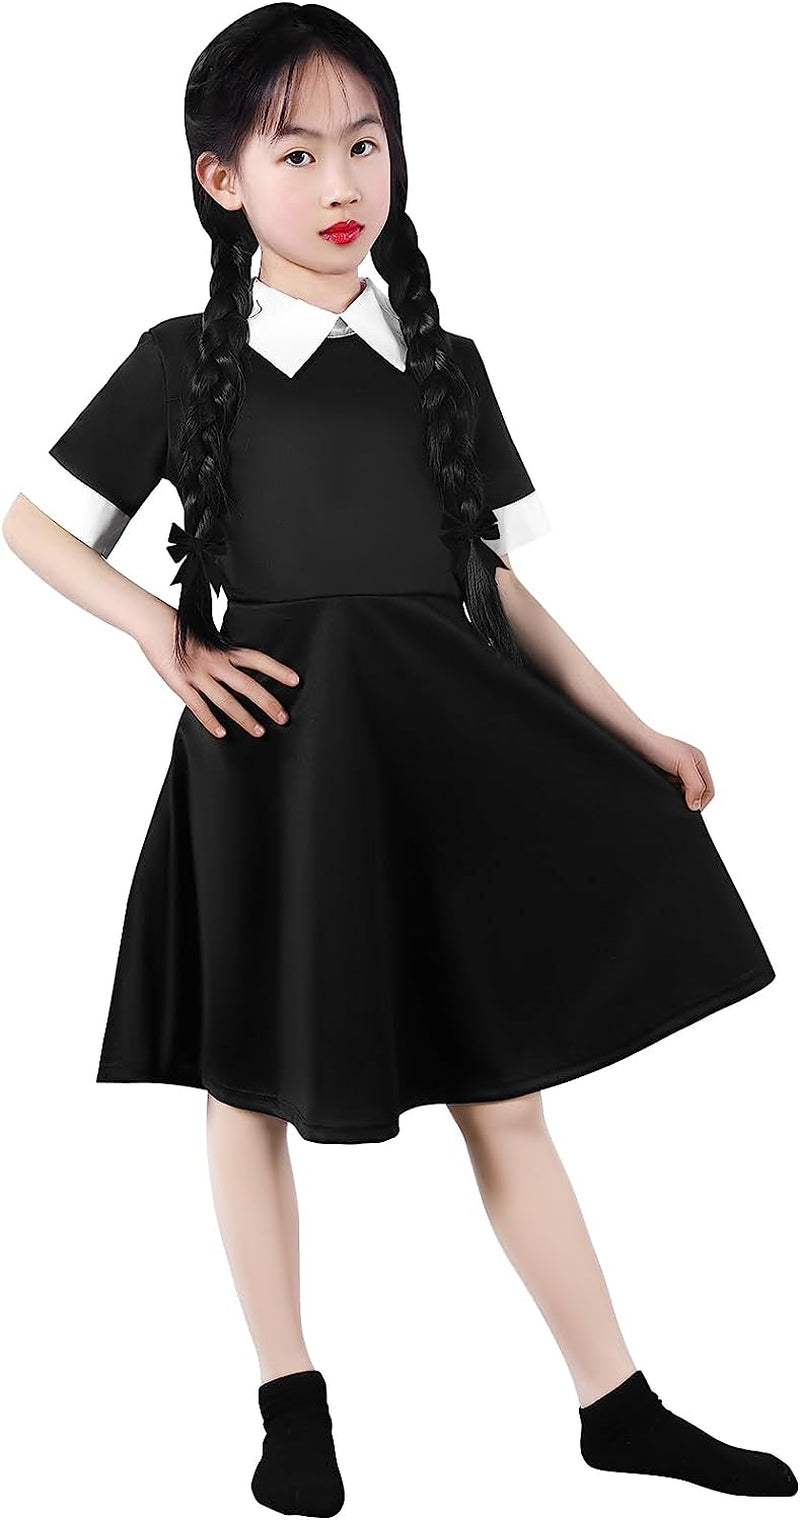 Wigood Wednesday Costume Girls Dress for Kids Addams Costumes Halloween Cosplay Party Dress with Socks 3-12 Years  Wigood Black_Short_Sleeve 3-4T 